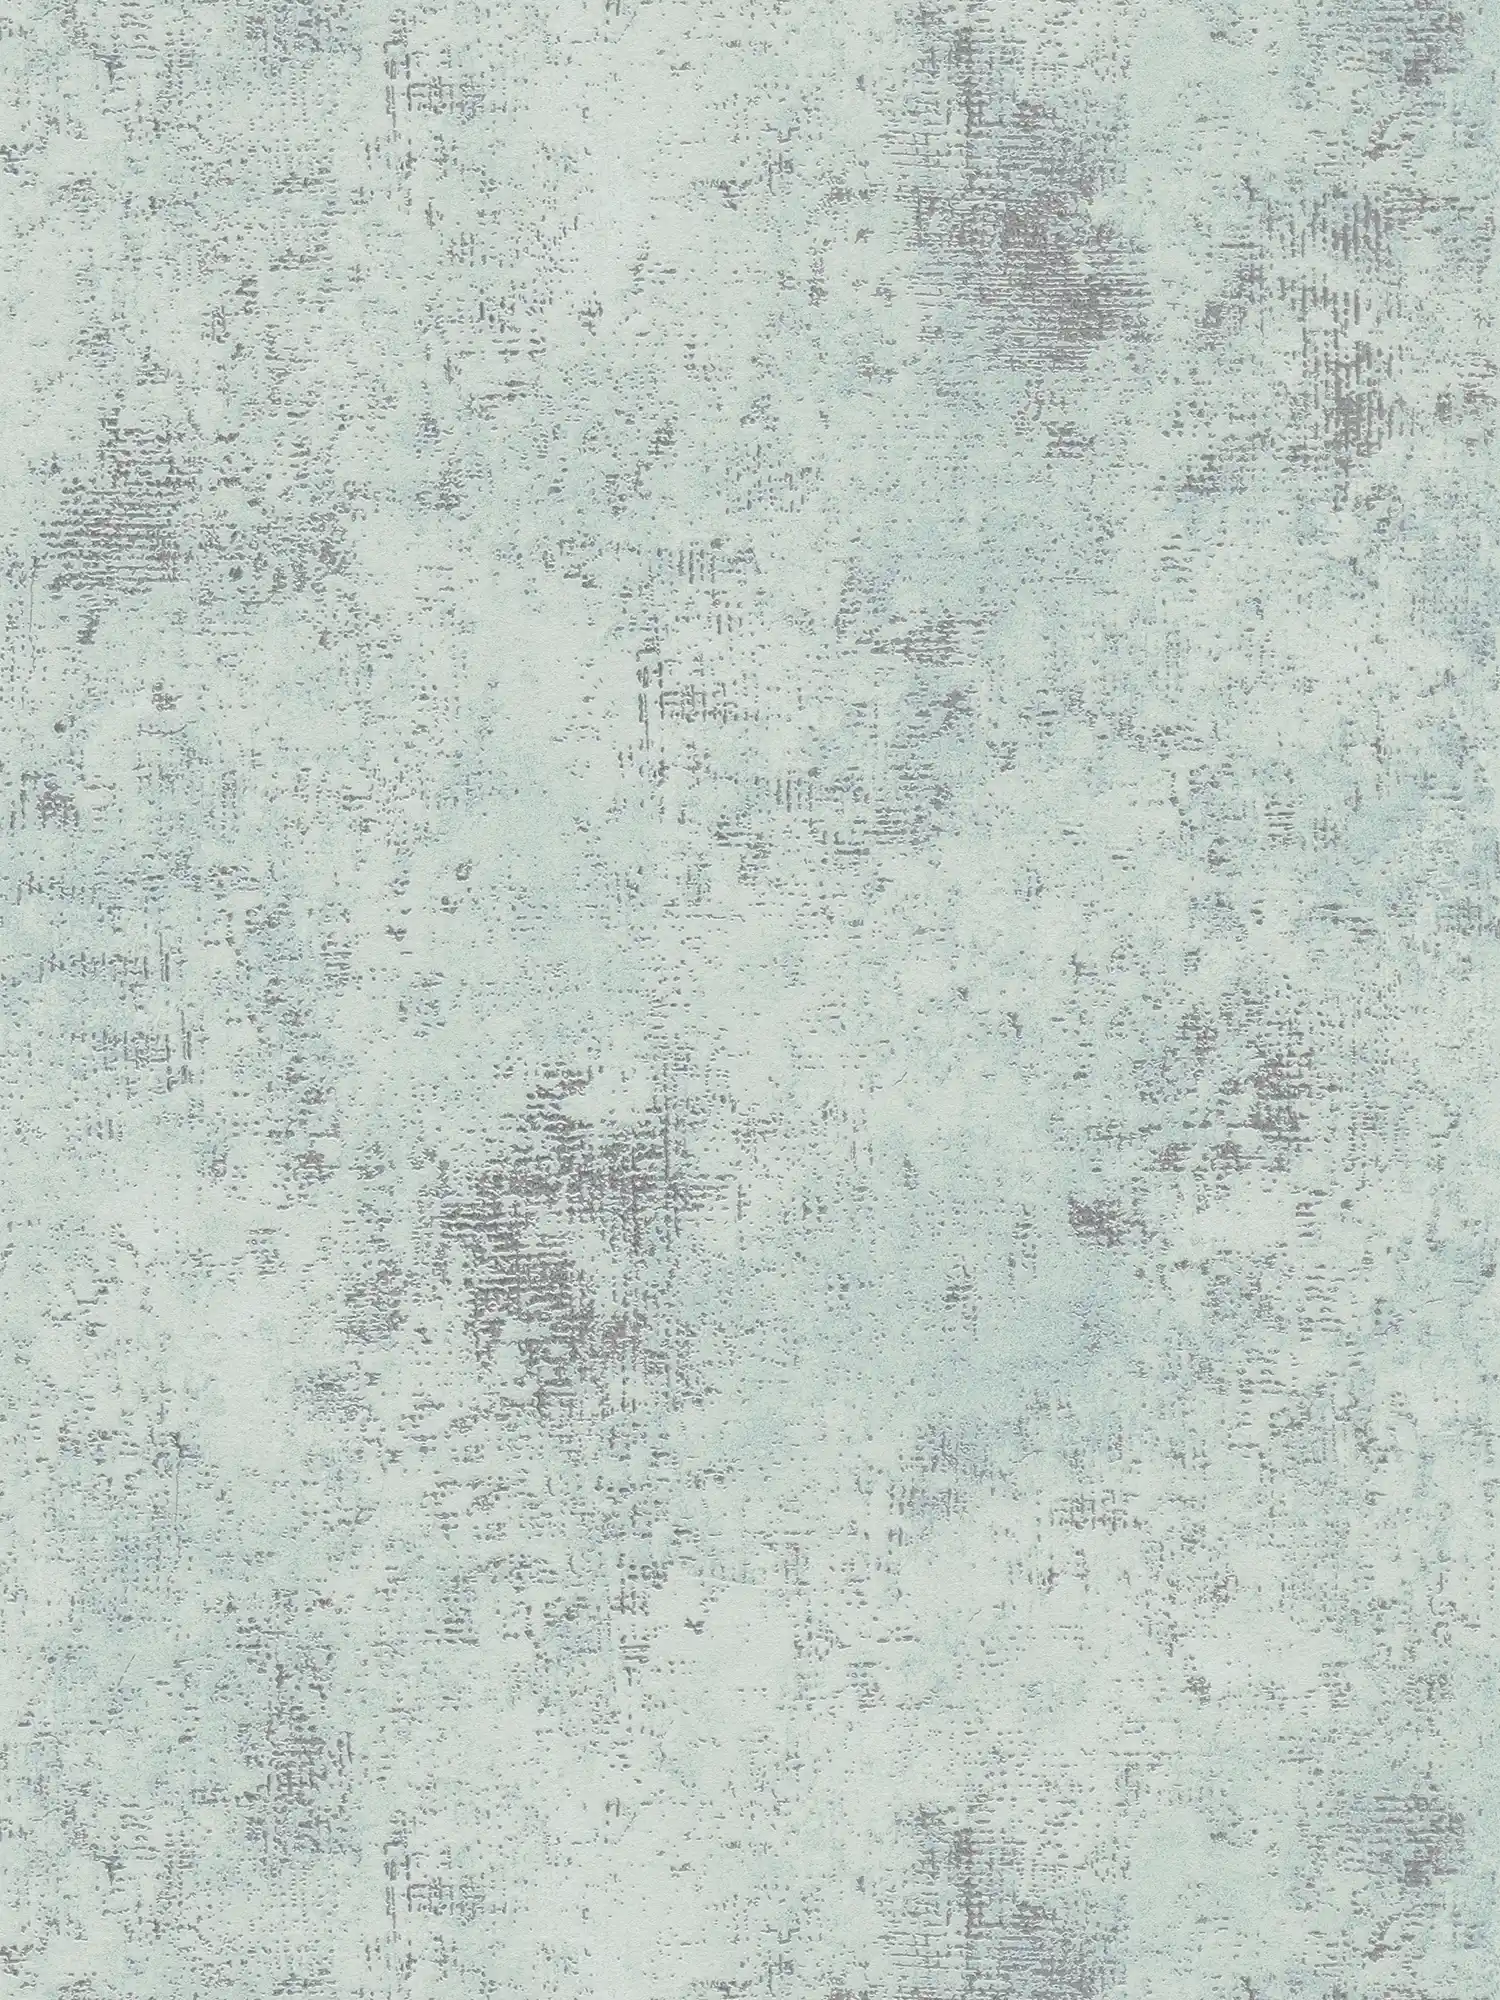 Rustic plaster look wallpaper with structure - blue, green, grey
